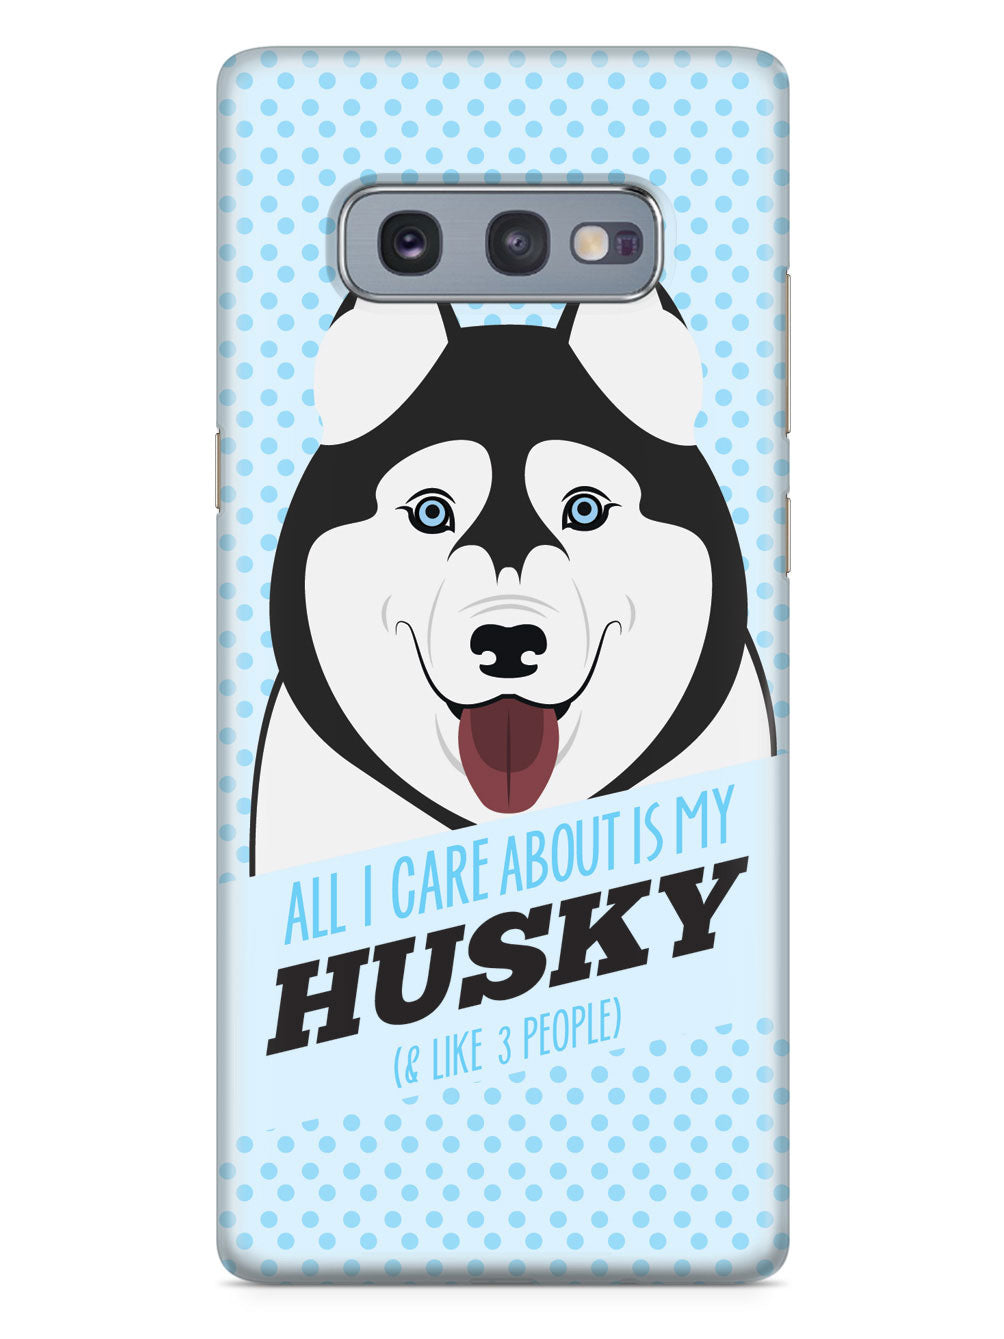 All I care about is my Husky Case